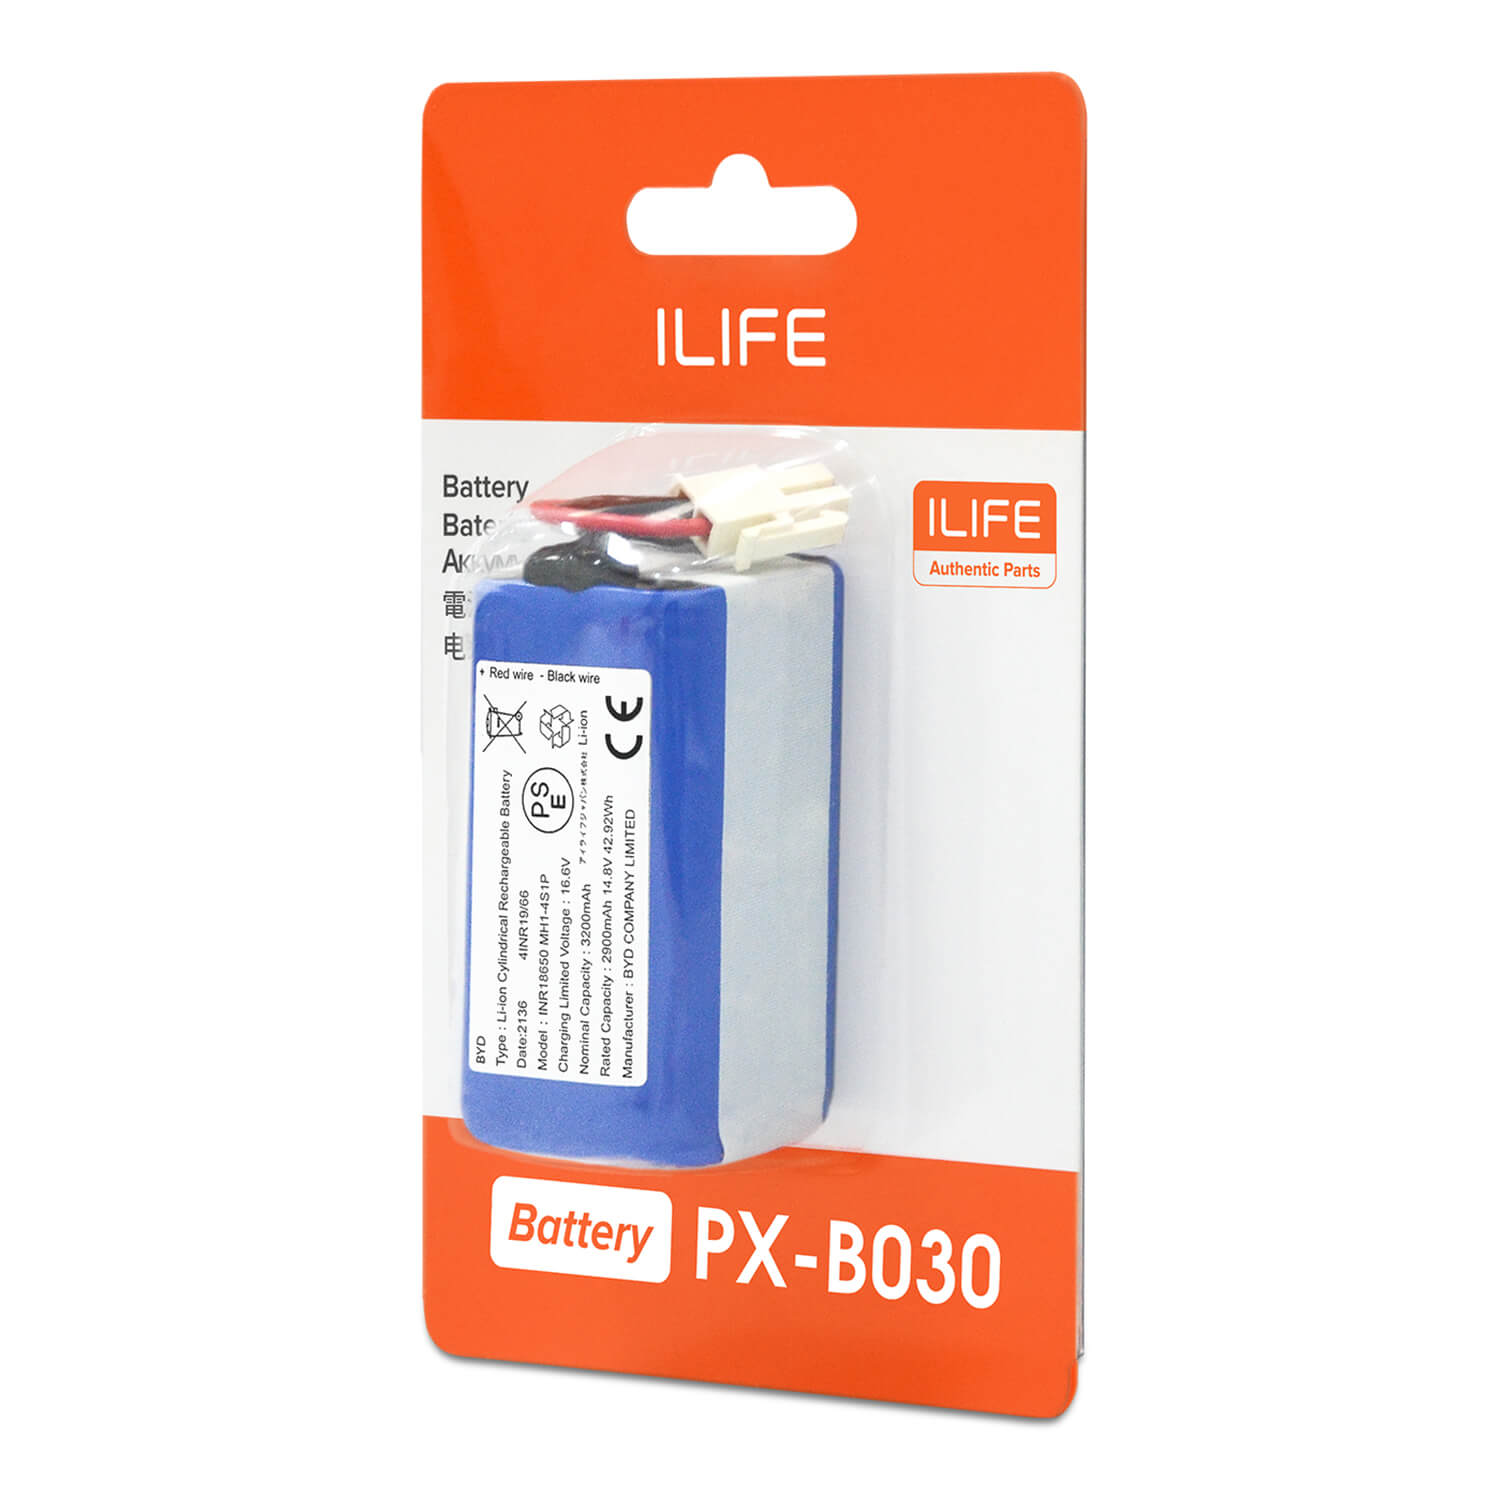 Battery Power Pack for ILIFE A10 W450_5